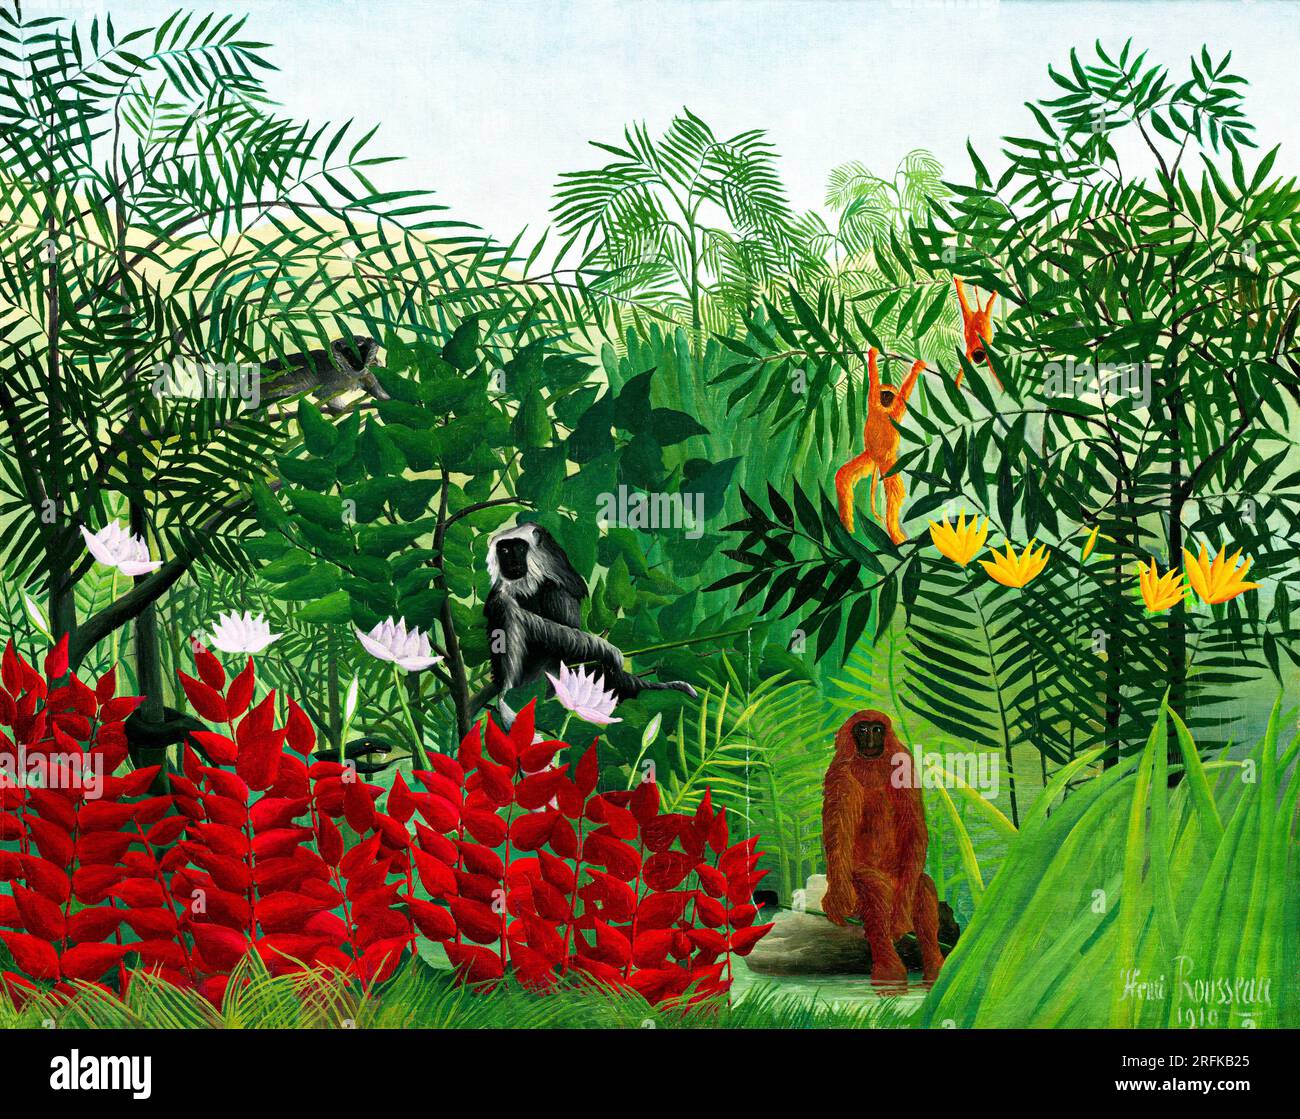 Tropical Forest with Monkeys  by Henri Rousseau. Original from The National Gallery of Art. Stock Photo